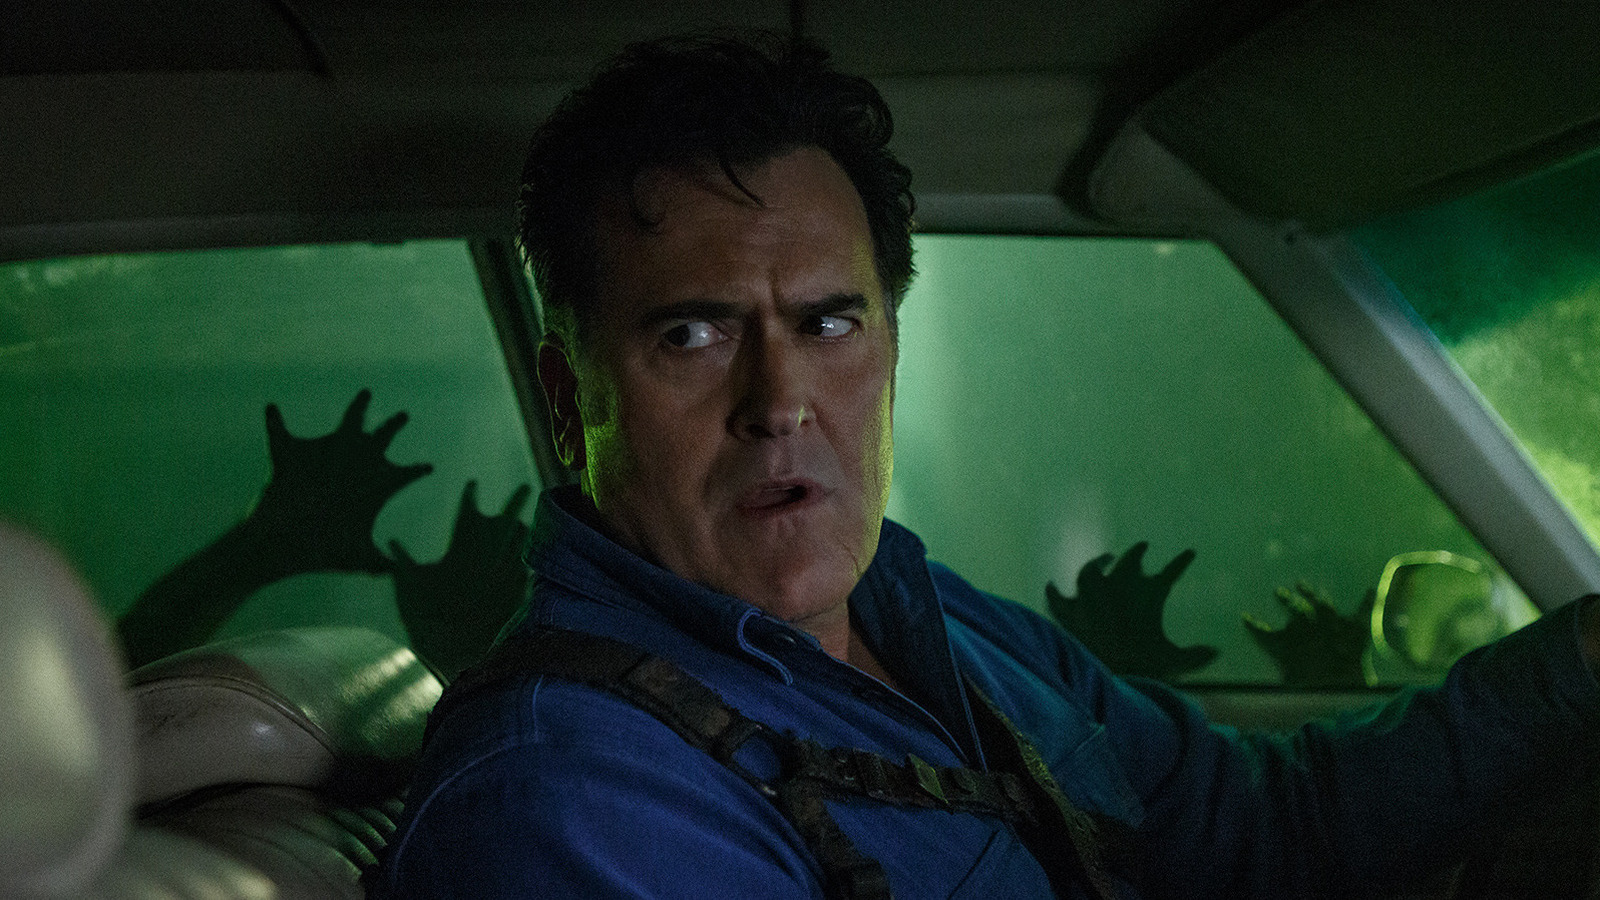 Petition · A New Evil Dead Game starring Bruce Campbell as Ash is Needed! ·